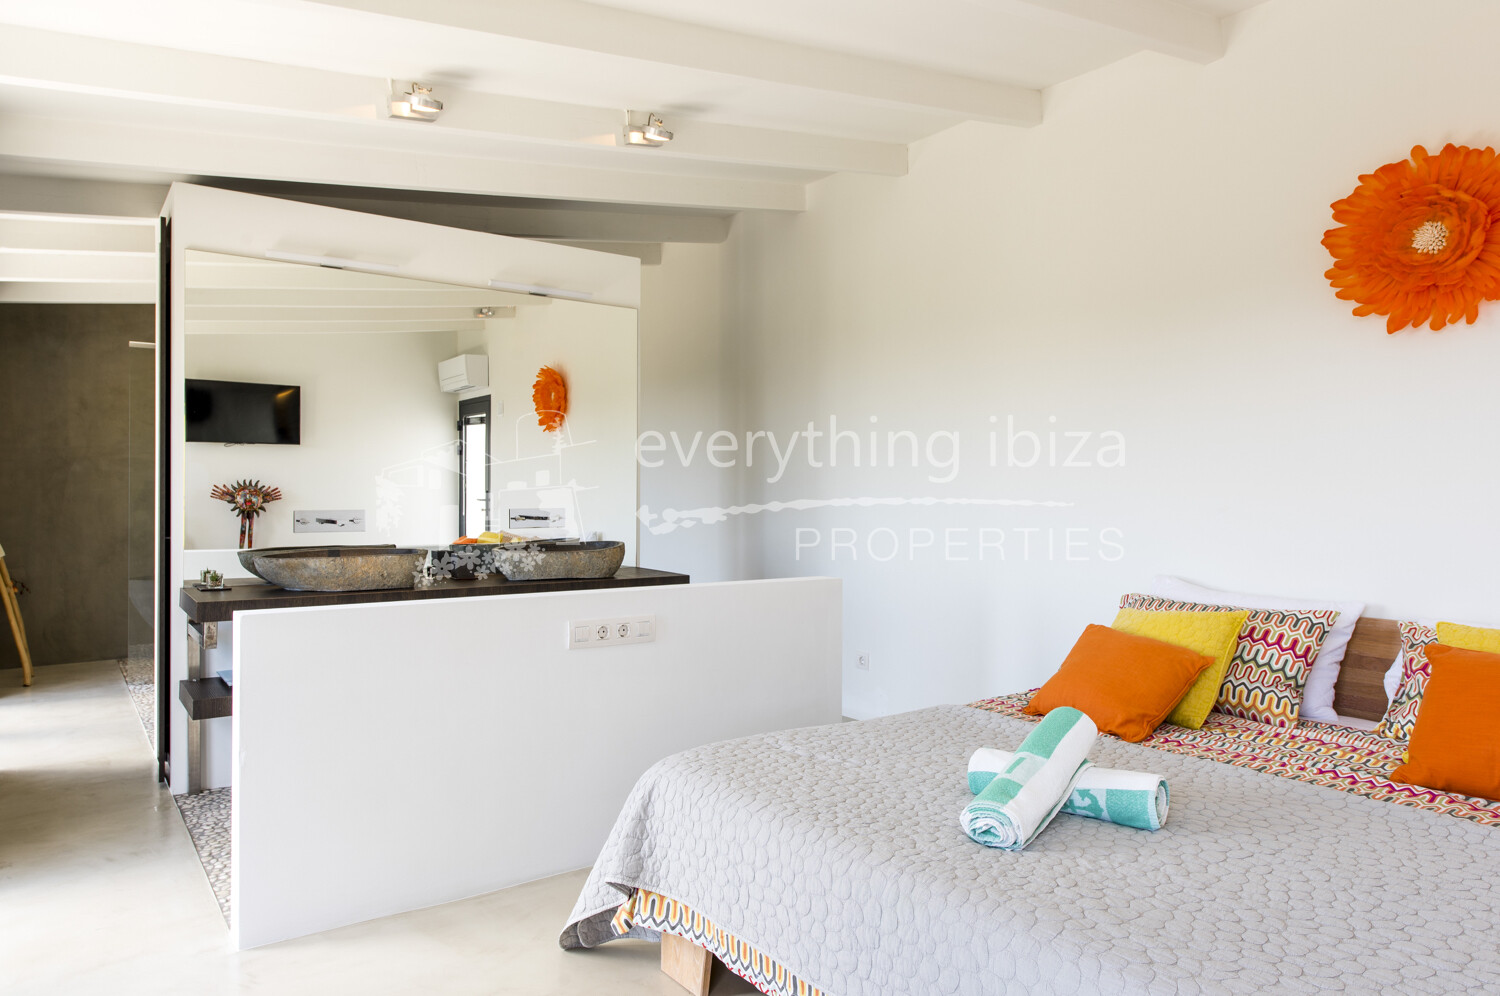 Seven Bedroom Villa with Tourist License and Elevated Sea Views, ref. 1656, for sale in Ibiza by everything ibiza Properties